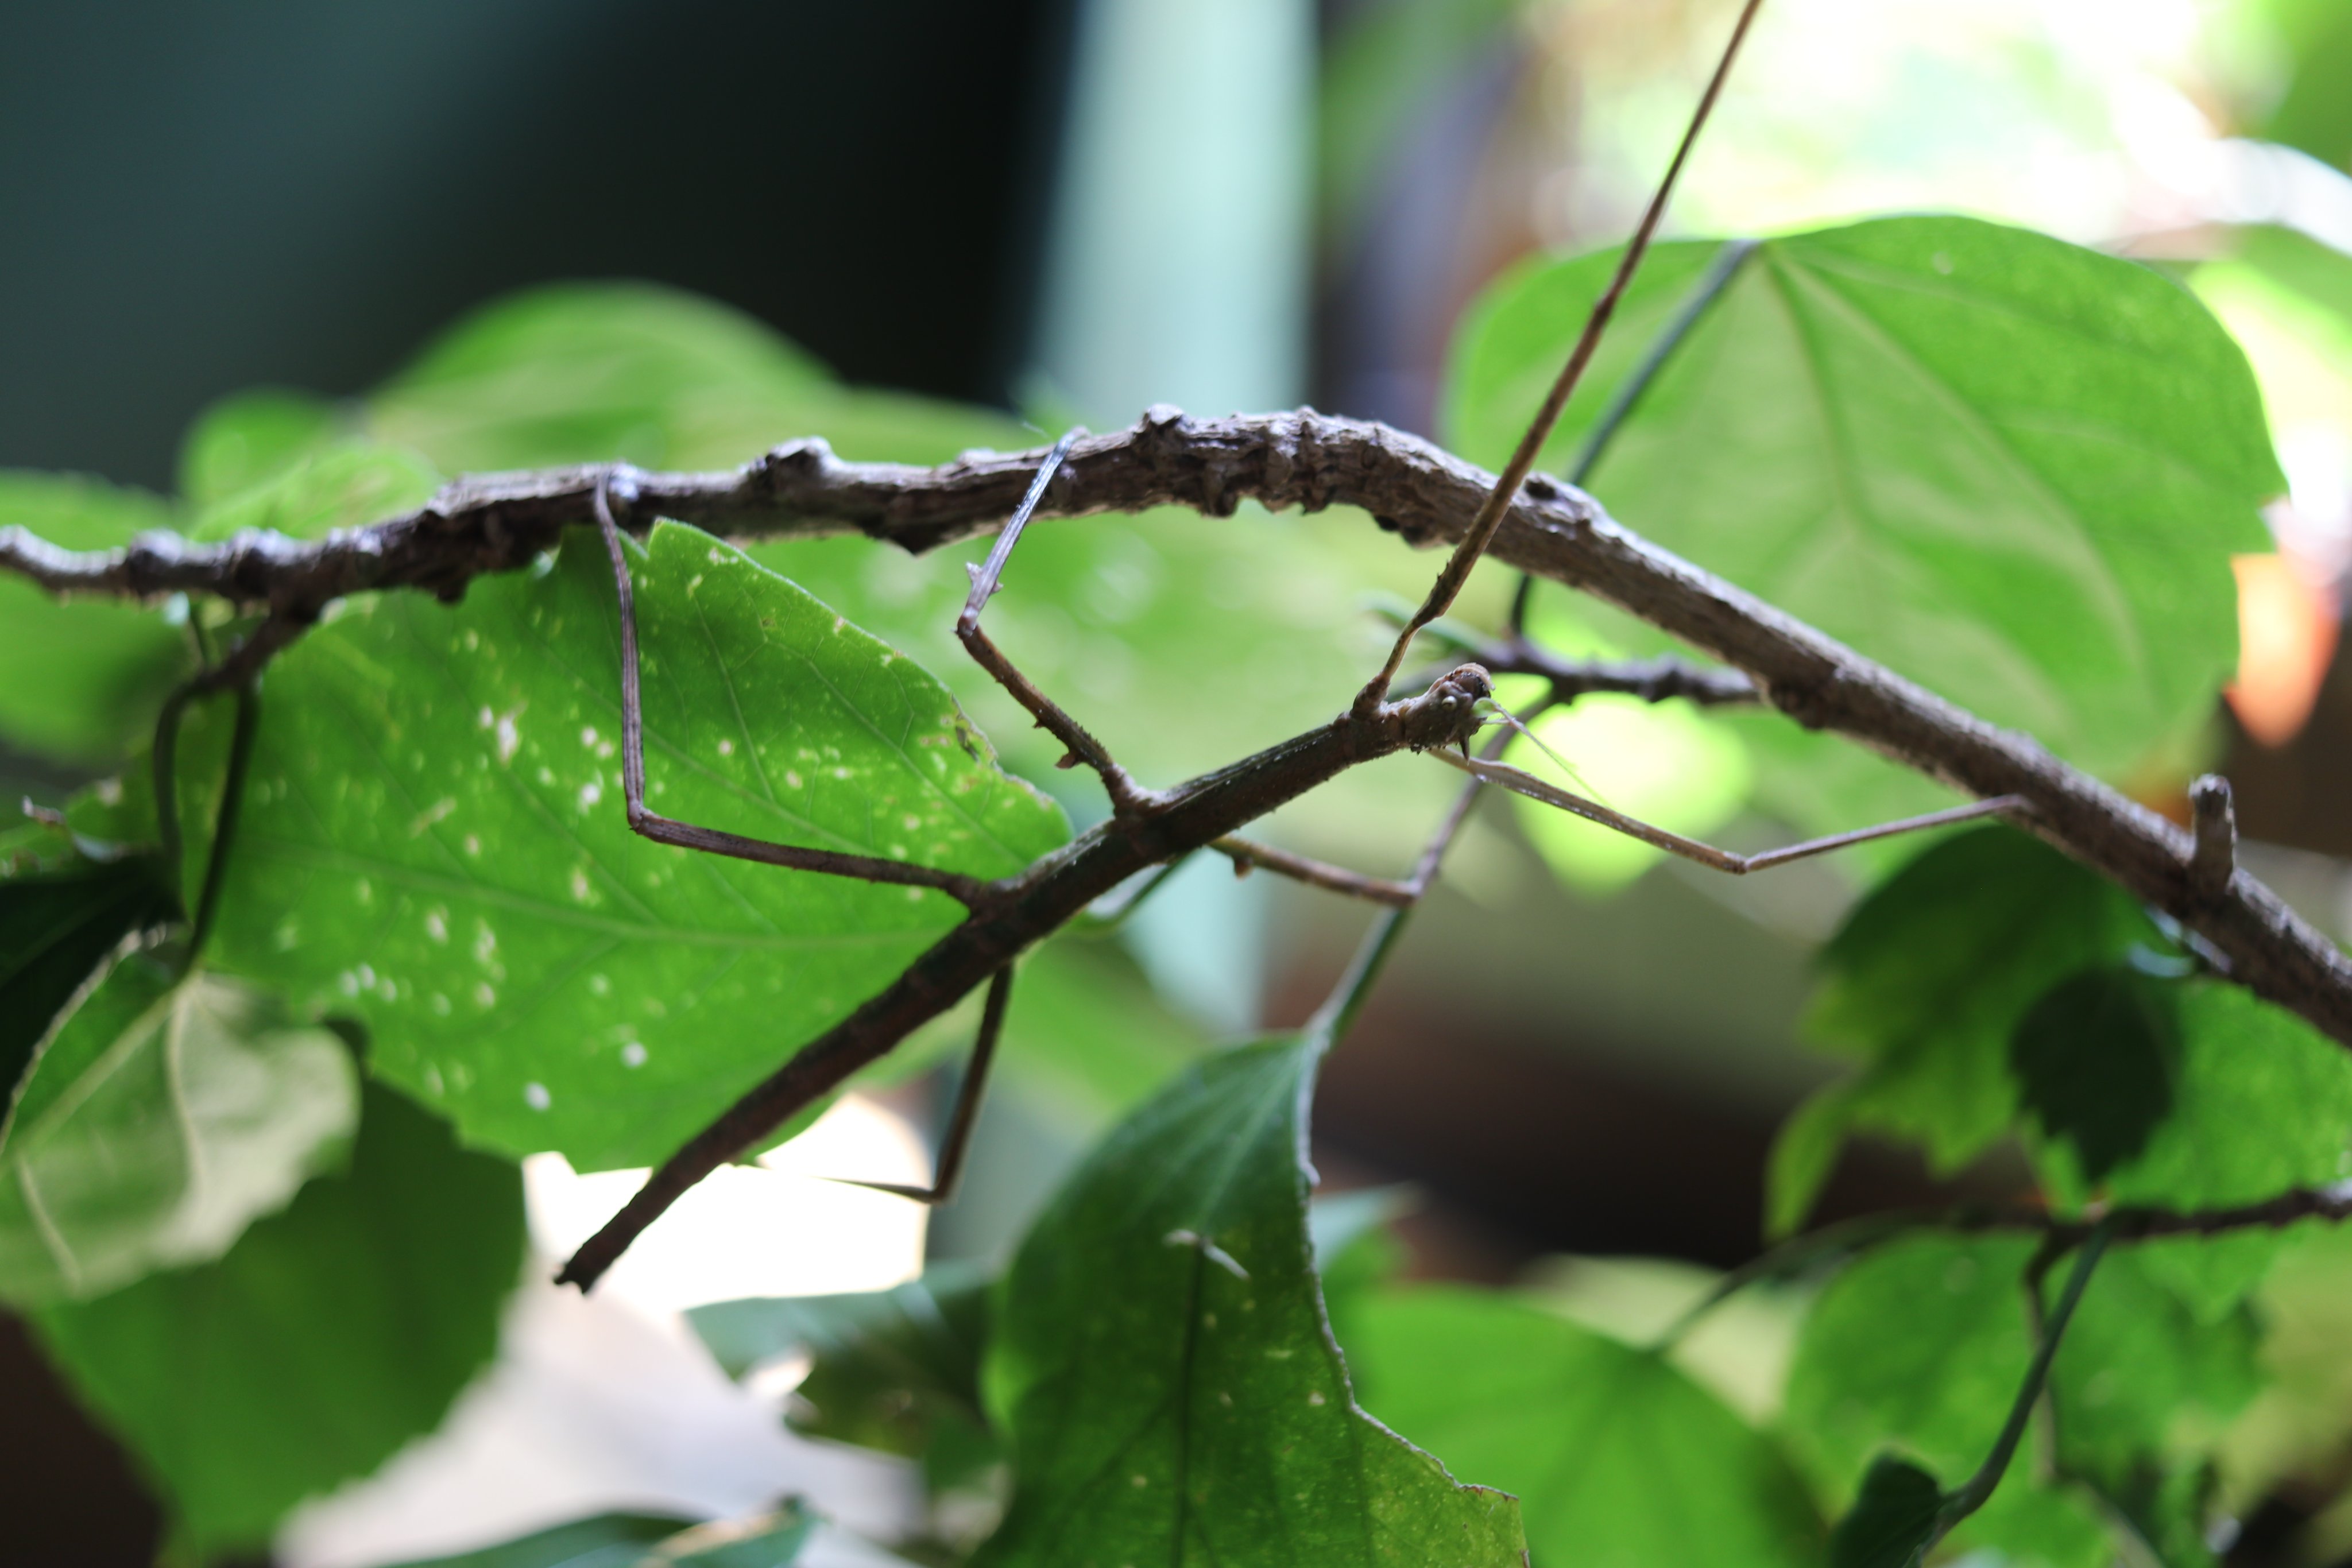 Teatown Lake Reservation on X: "A Vietnamese Walking Stick insect, enjoying  a moment blending in with its surroundings. Though this variety is not  native to our area, New York is home to